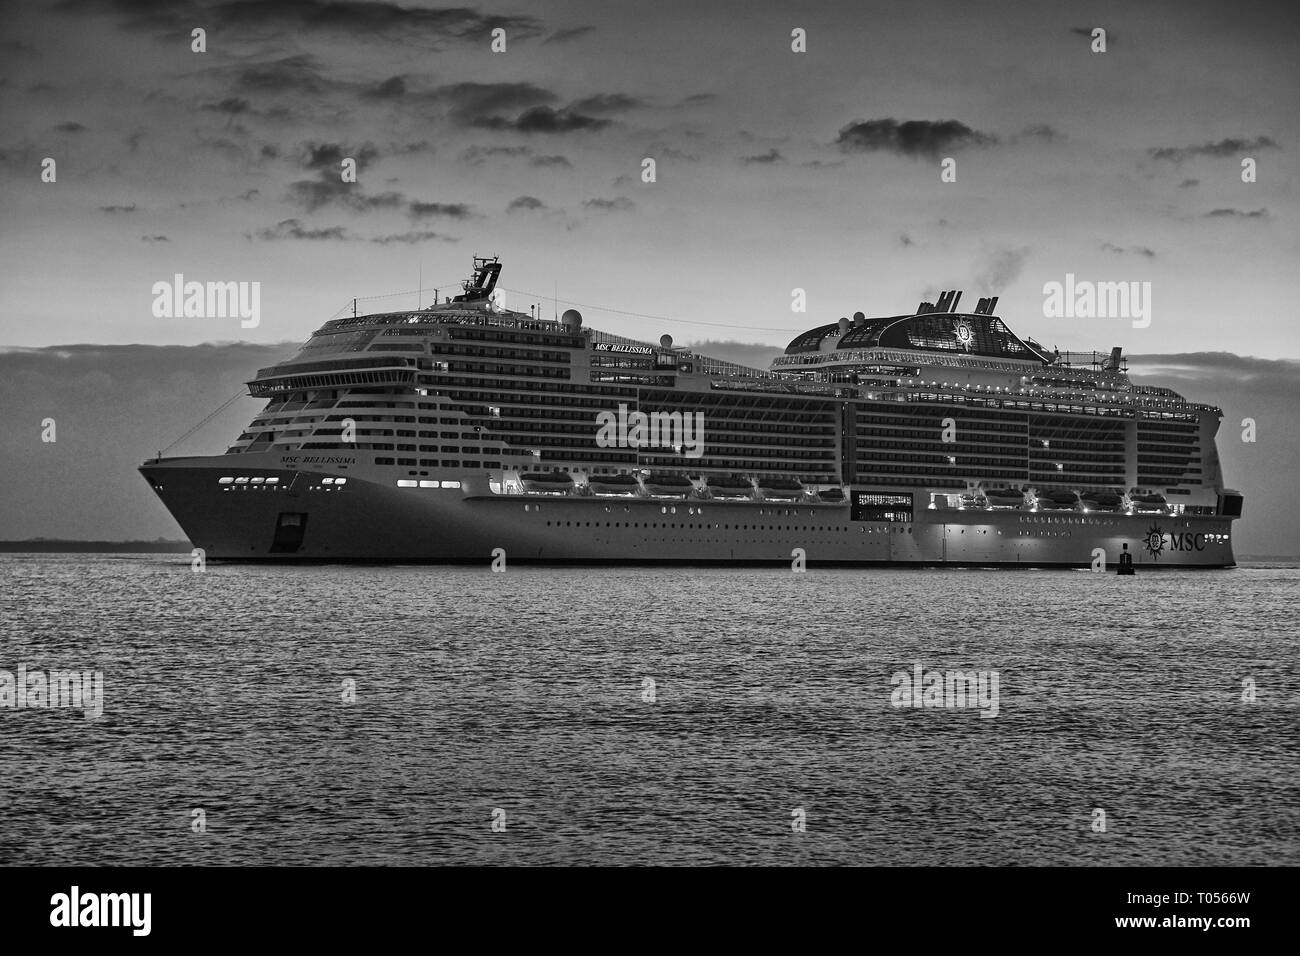 Black & White Image Of MSC Cruises New Flag Ship, MSC BELLISSIMA, On Her Maiden Voyage From St. Nazaire, France To Southampton, UK. Stock Photo